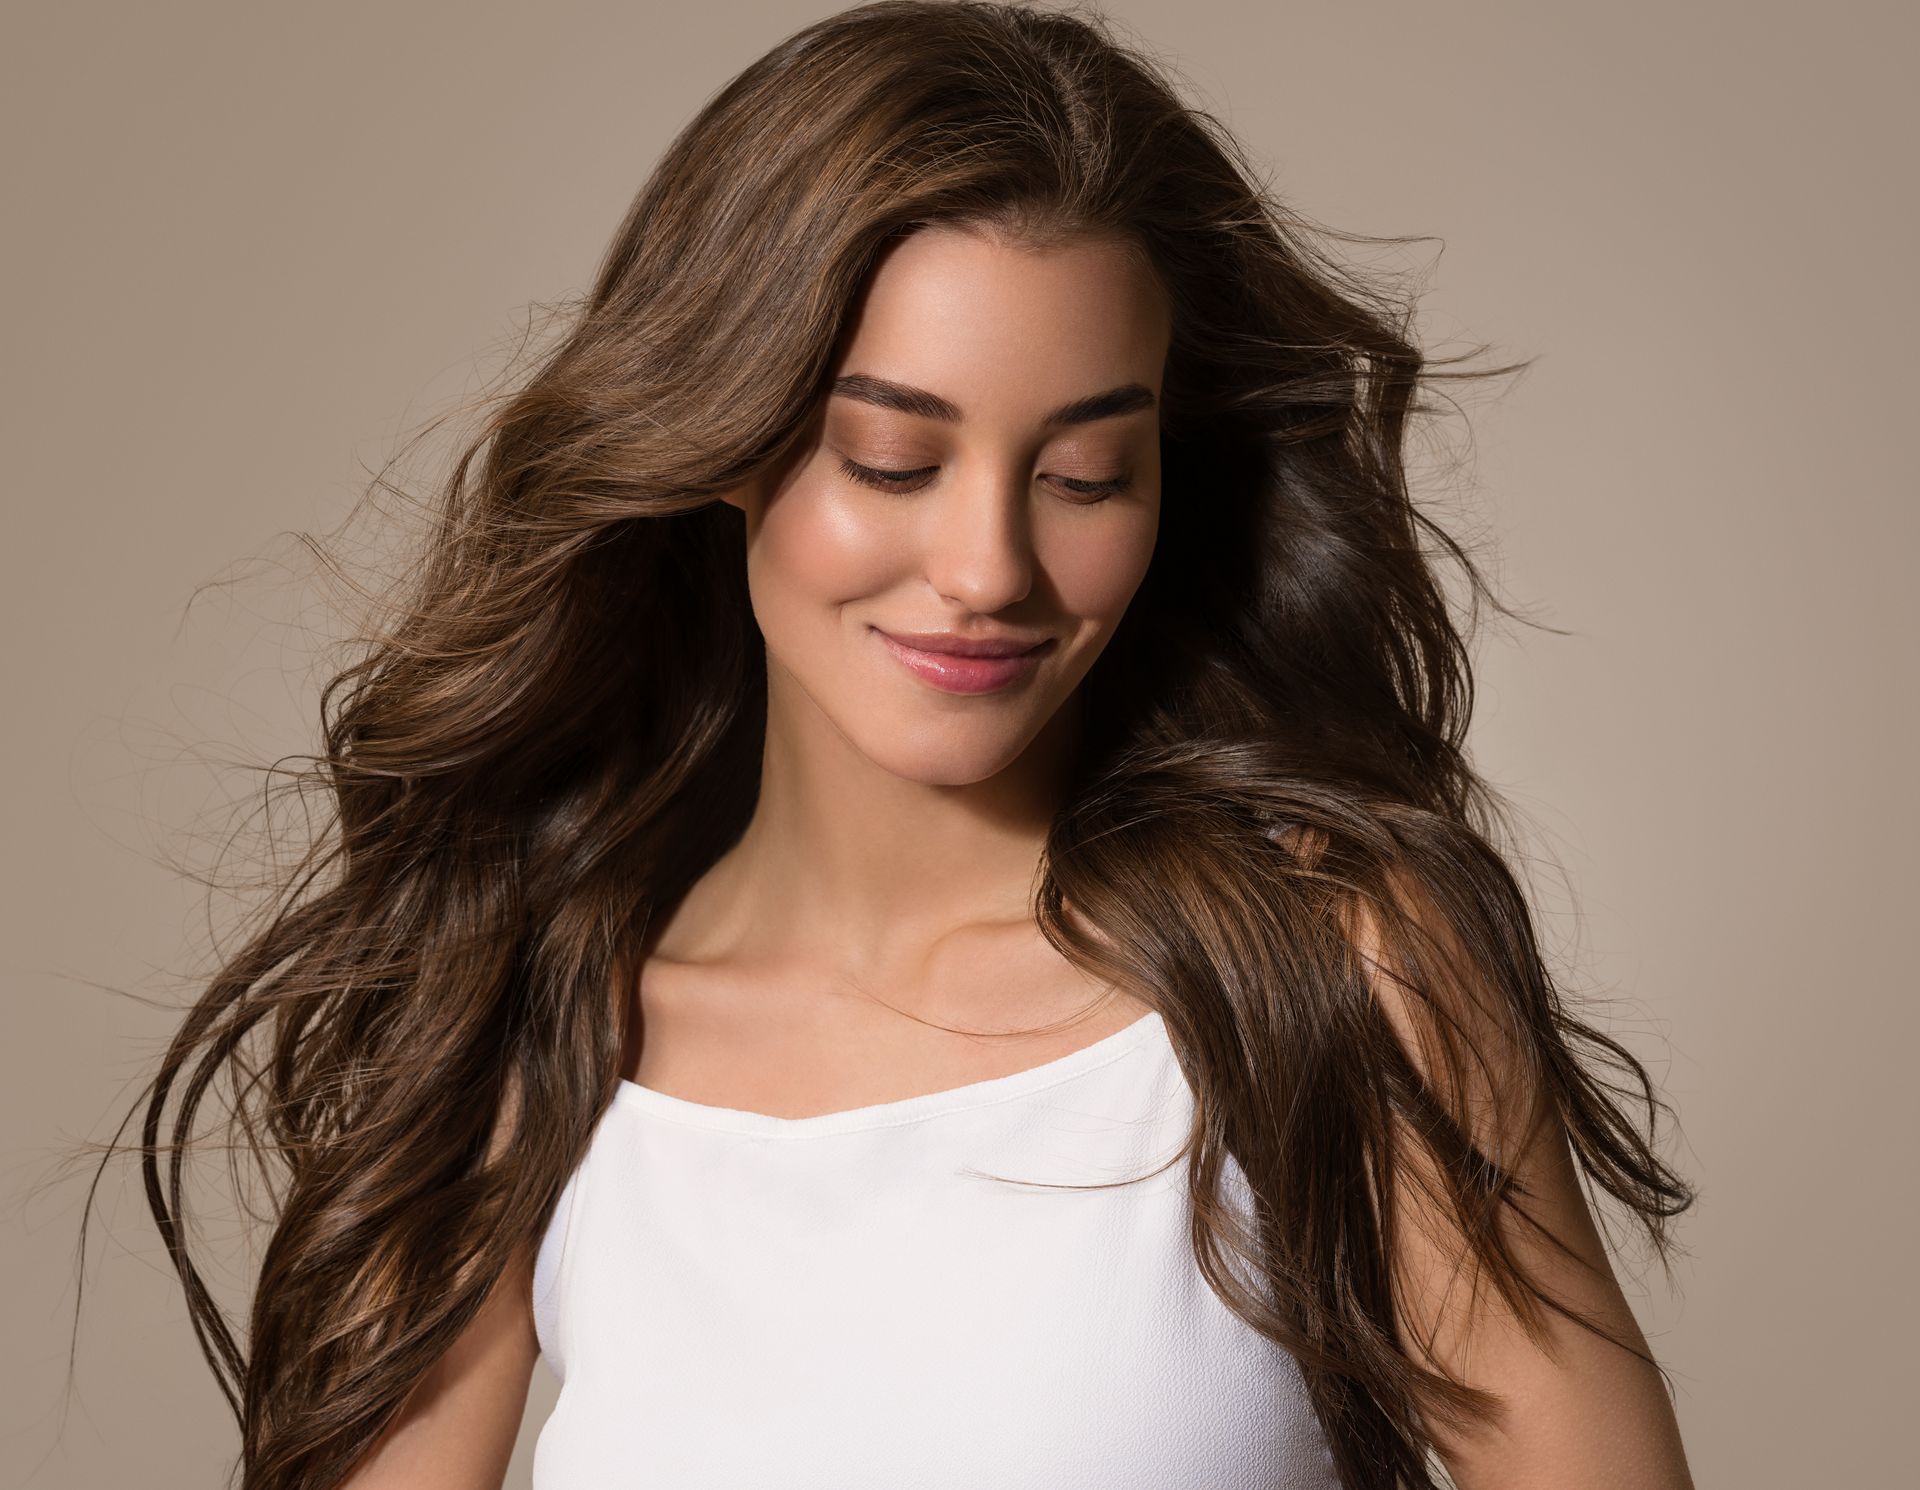 a woman with long brown hair is wearing a white tank top .